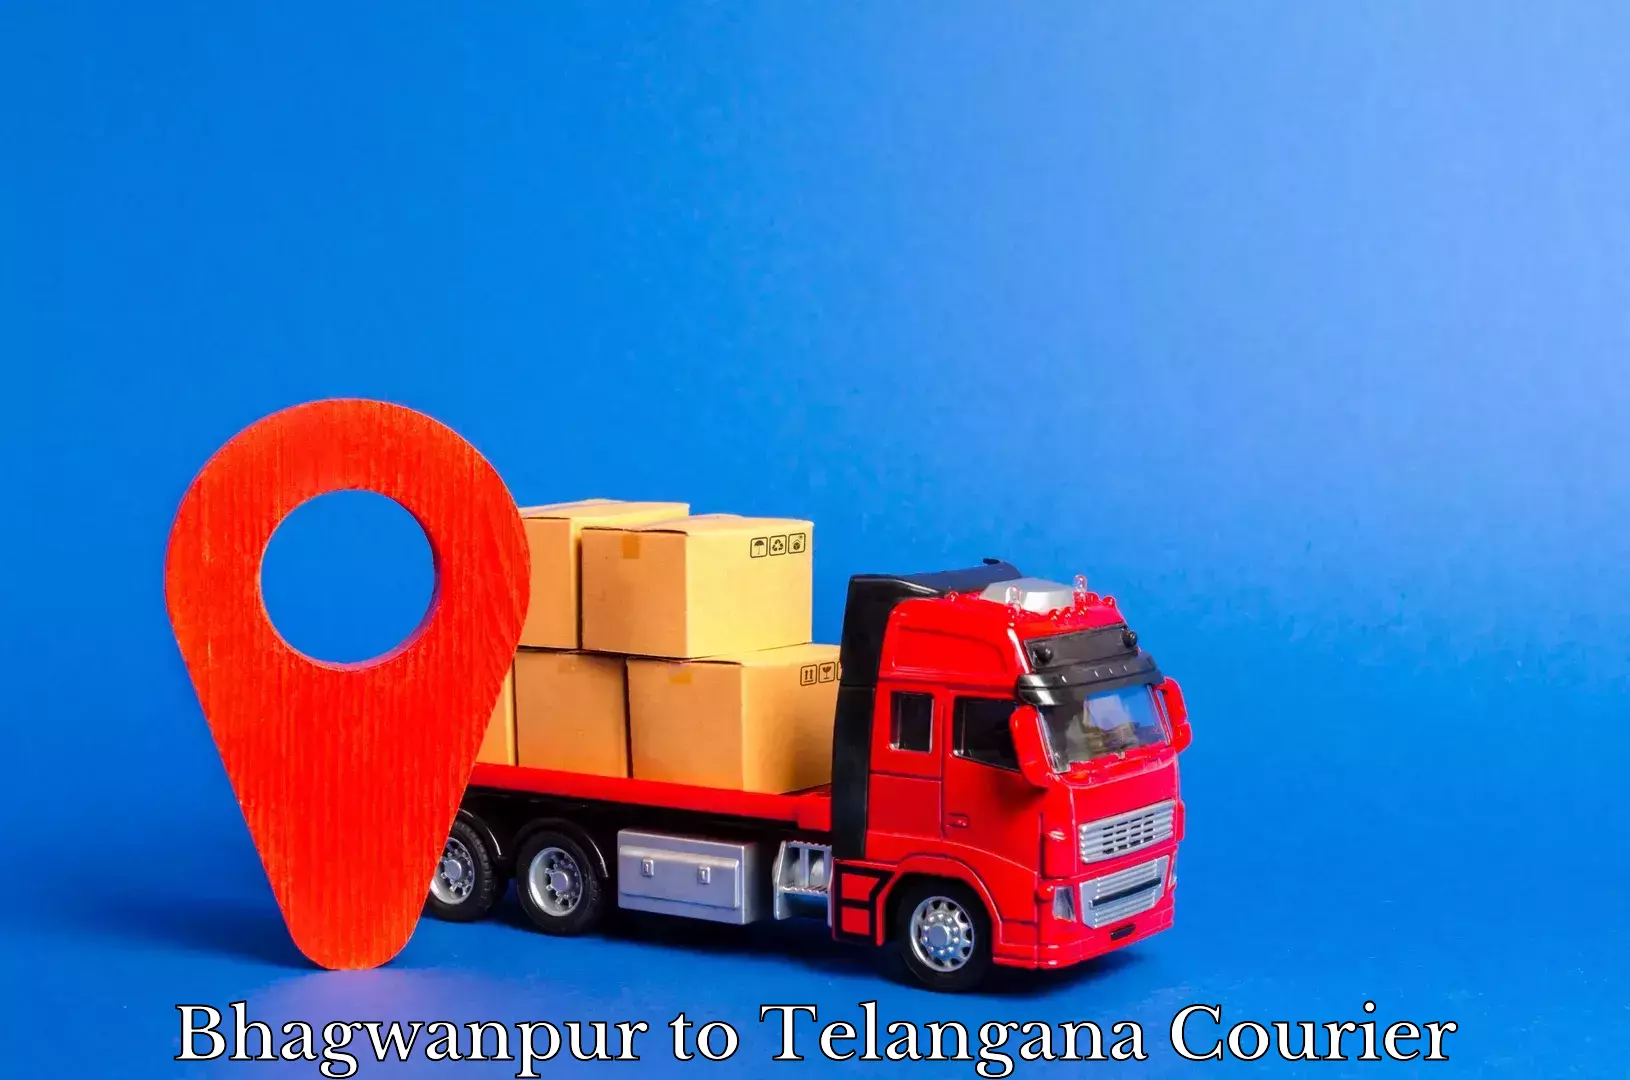 Personalized courier experiences Bhagwanpur to Telangana